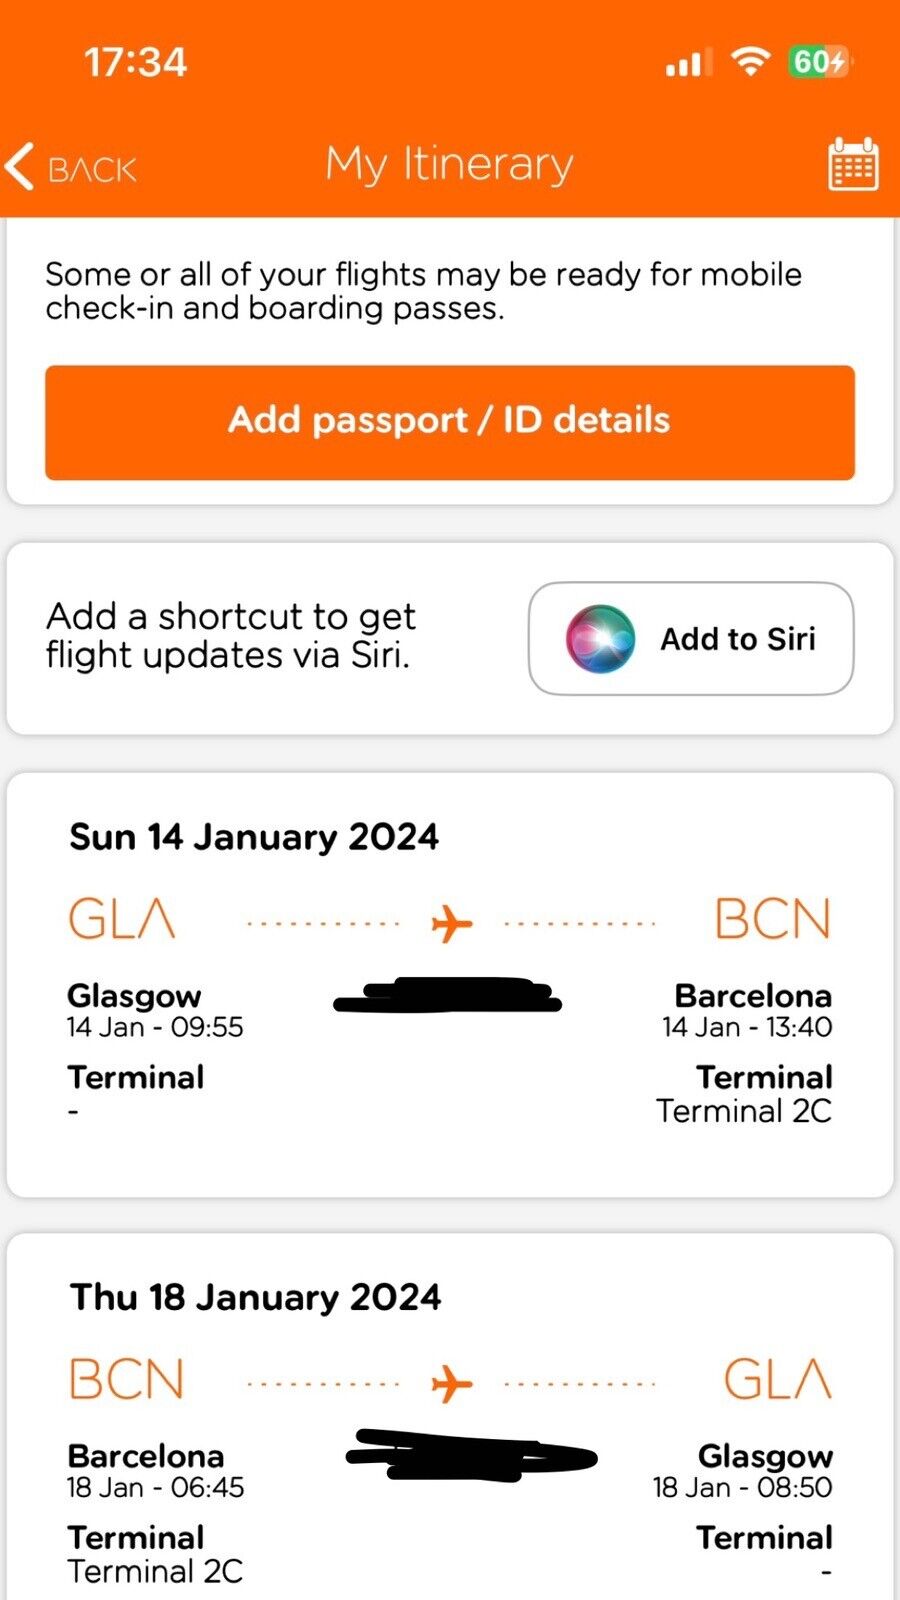 HOLIDAY TO BARCELONA FOR 2!